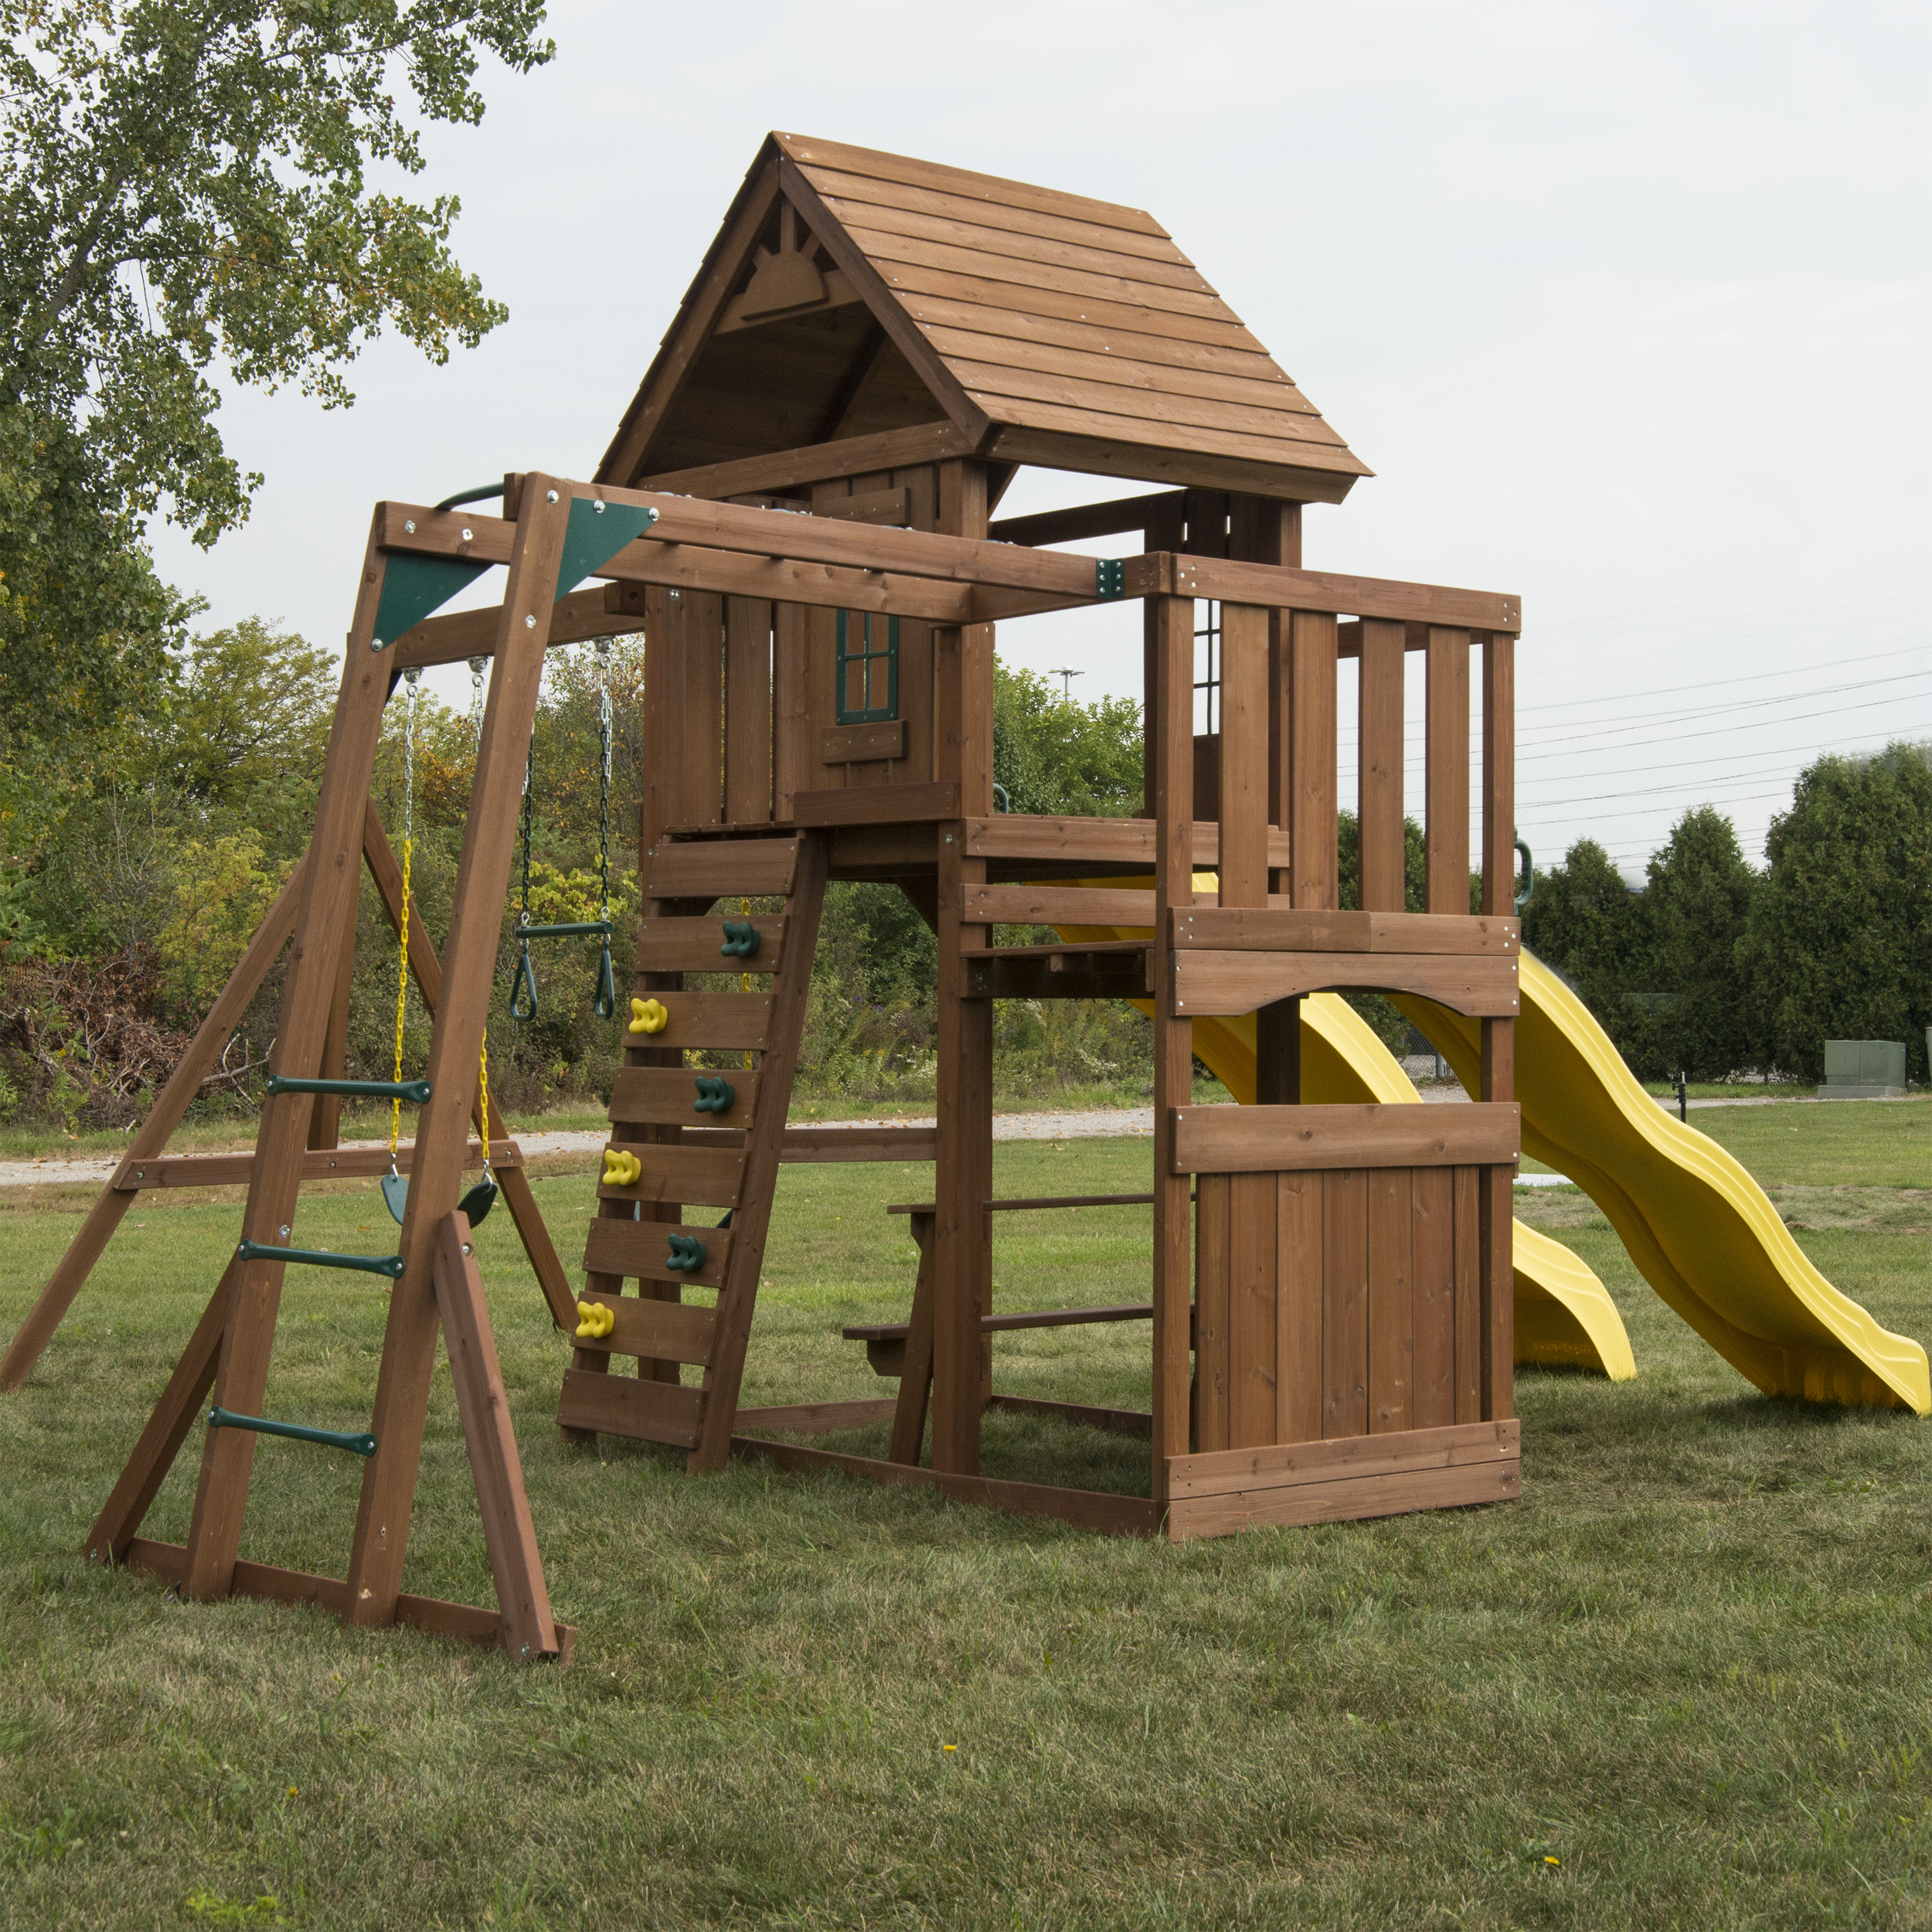 Swing-N-Slide Timberview Wooden Backyard Swing Set with Two Yellow Wave Slides, Wood Roof, Swings, and Monkey Bars - image 3 of 12